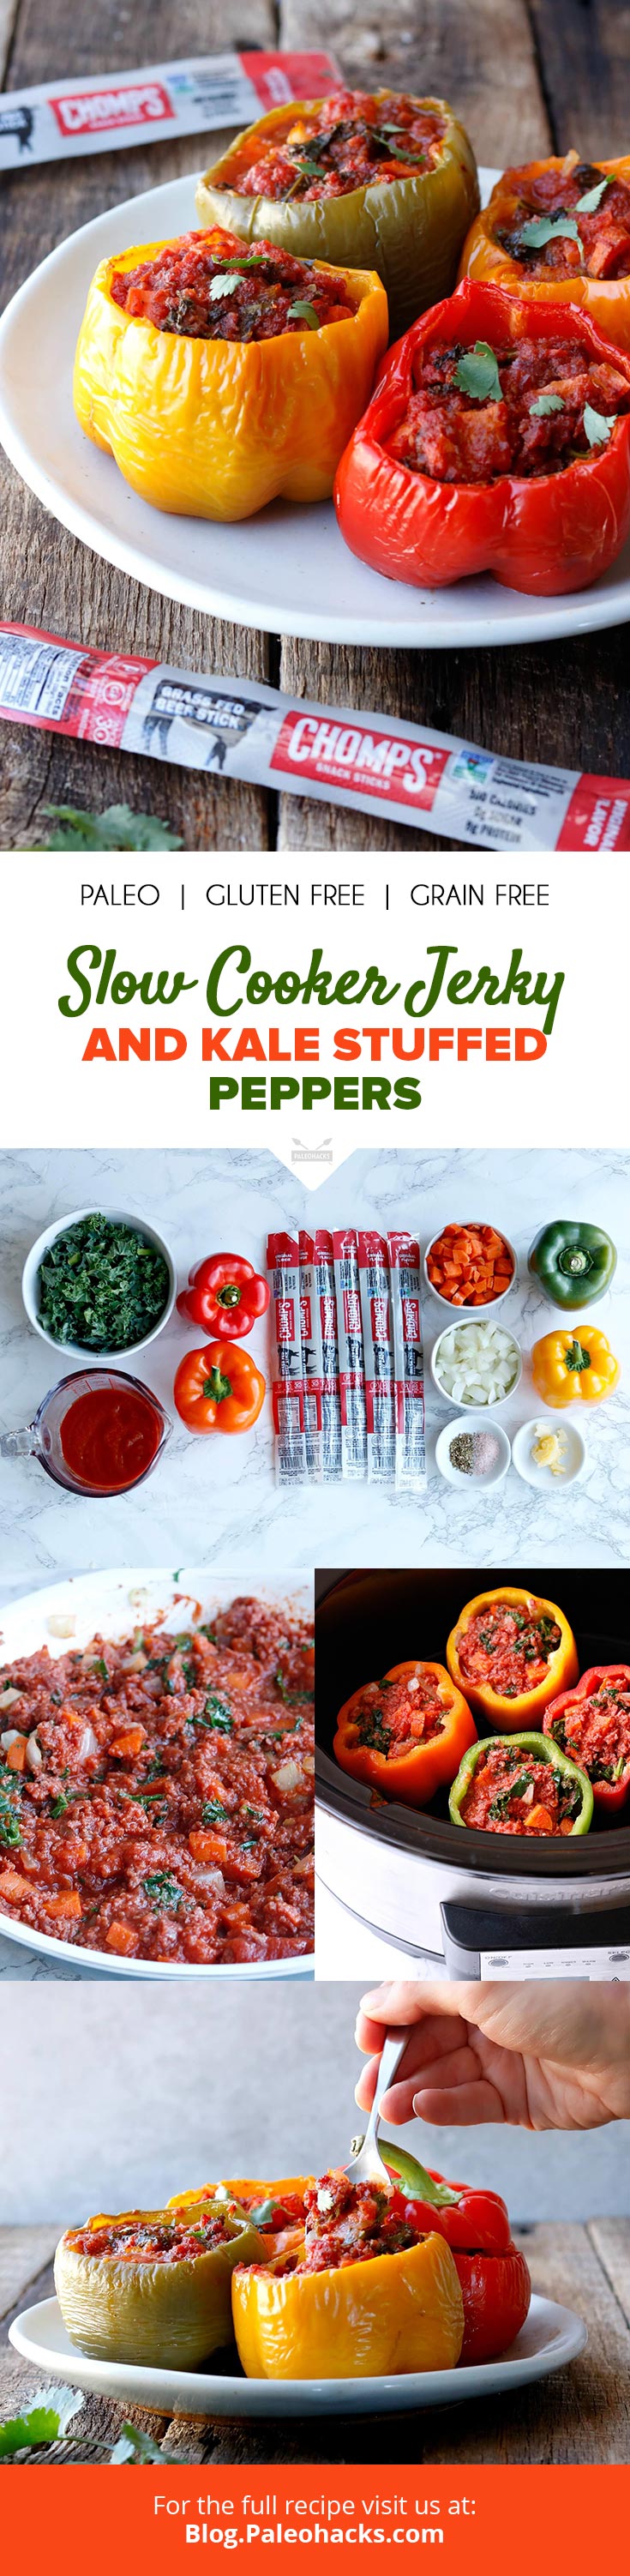 Let your slow cooker do the work while fresh bell peppers stuffed with savory beef jerky and kale simmer in a rich tomato sauce.